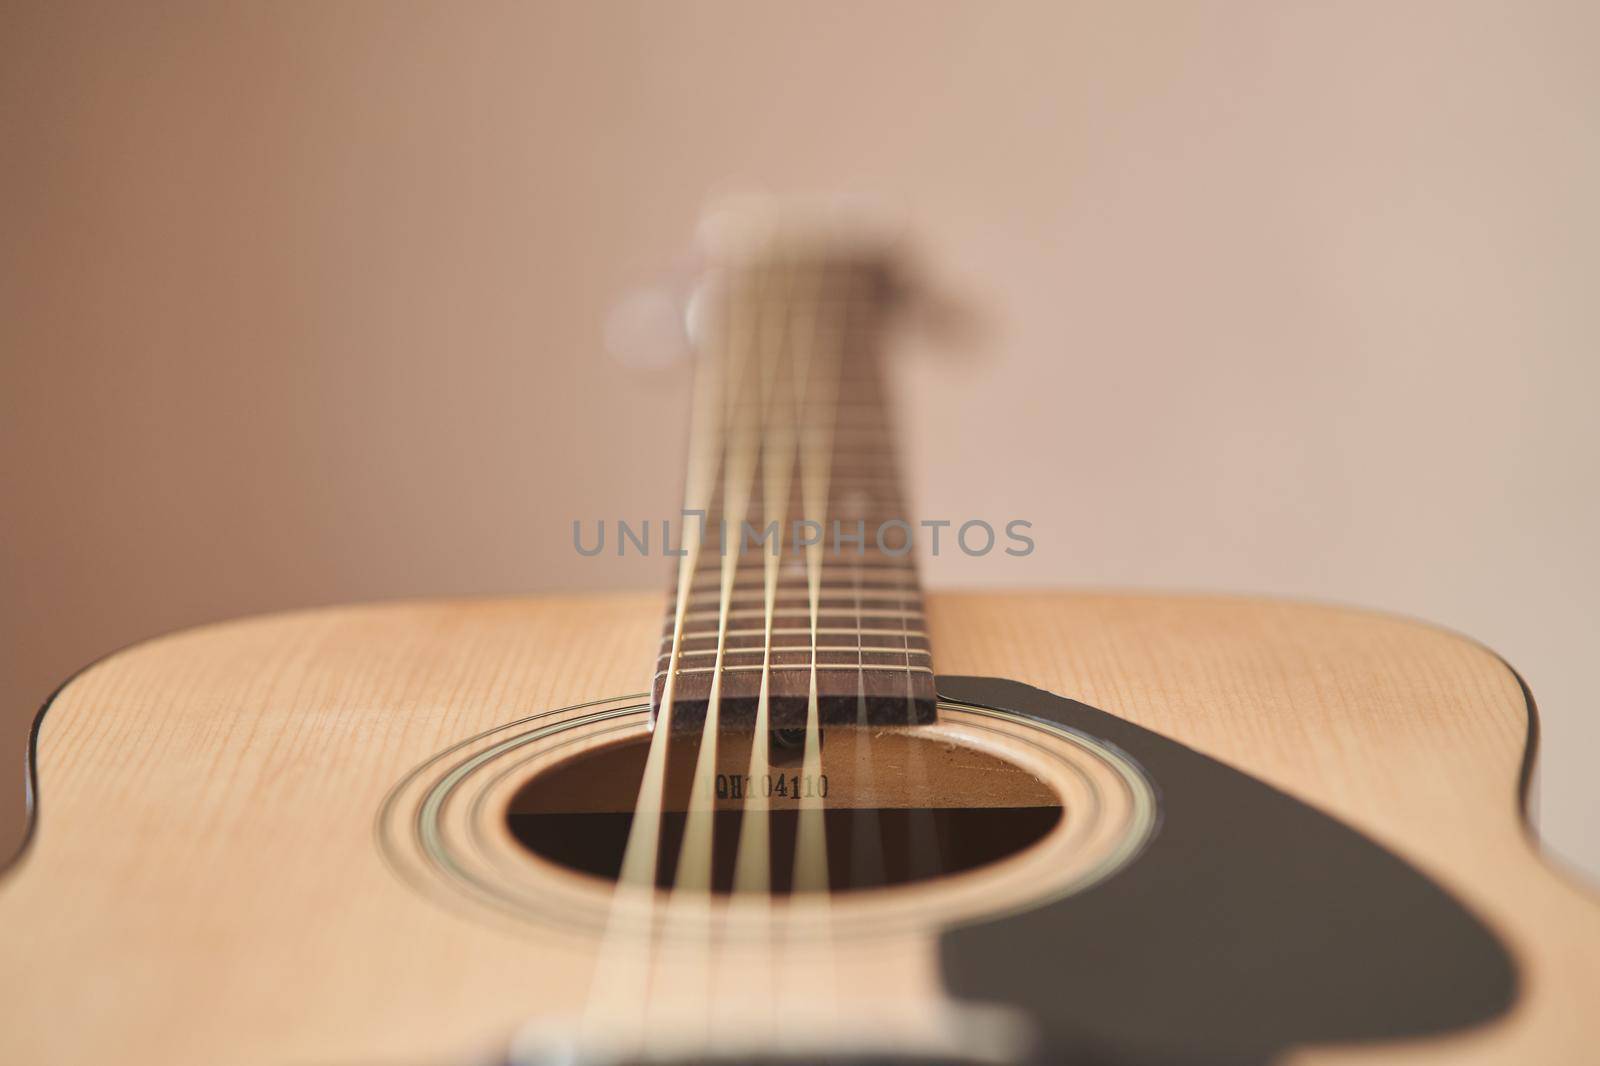 Acoustic guitar. Musical instrument. Close-up.